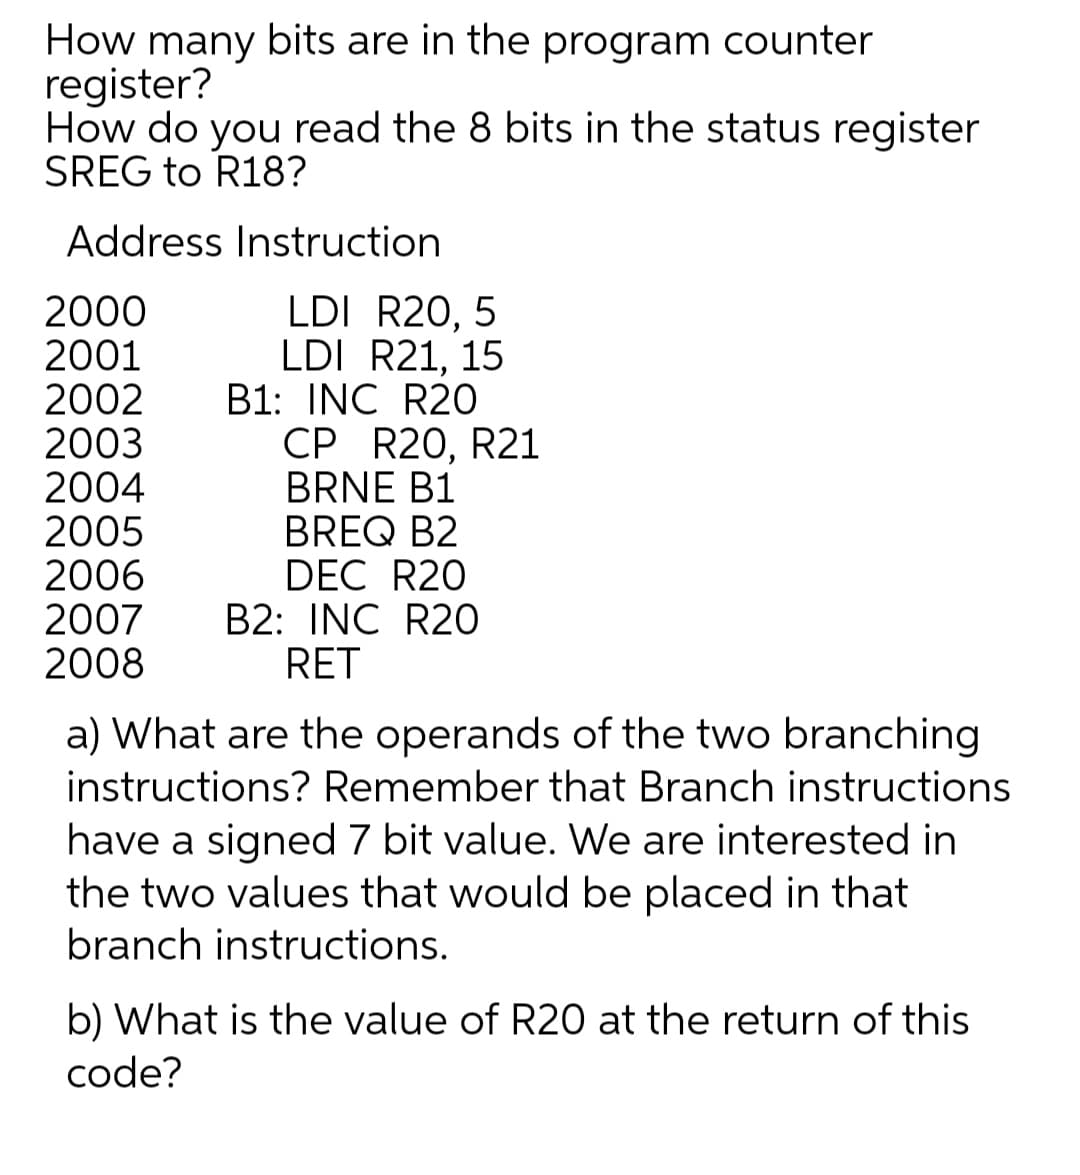 How many bits are in the program counter
register?
How do you read the 8 bits in the status register
SREG to R18?
Address Instruction
2000
2001
2002
2003
2004
2005
2006
2007
2008
LDI R20, 5
LDI R21, 15
B1: INC R2O
CP R20, R21
BRNE B1
BREQ B2
DEC R20
B2: INC R2O
RET
a) What are the operands of the two branching
instructions? Remember that Branch instructions
have a signed 7 bit value. We are interested in
the two values that would be placed in that
branch instructions.
b) What is the value of R20 at the return of this
code?
